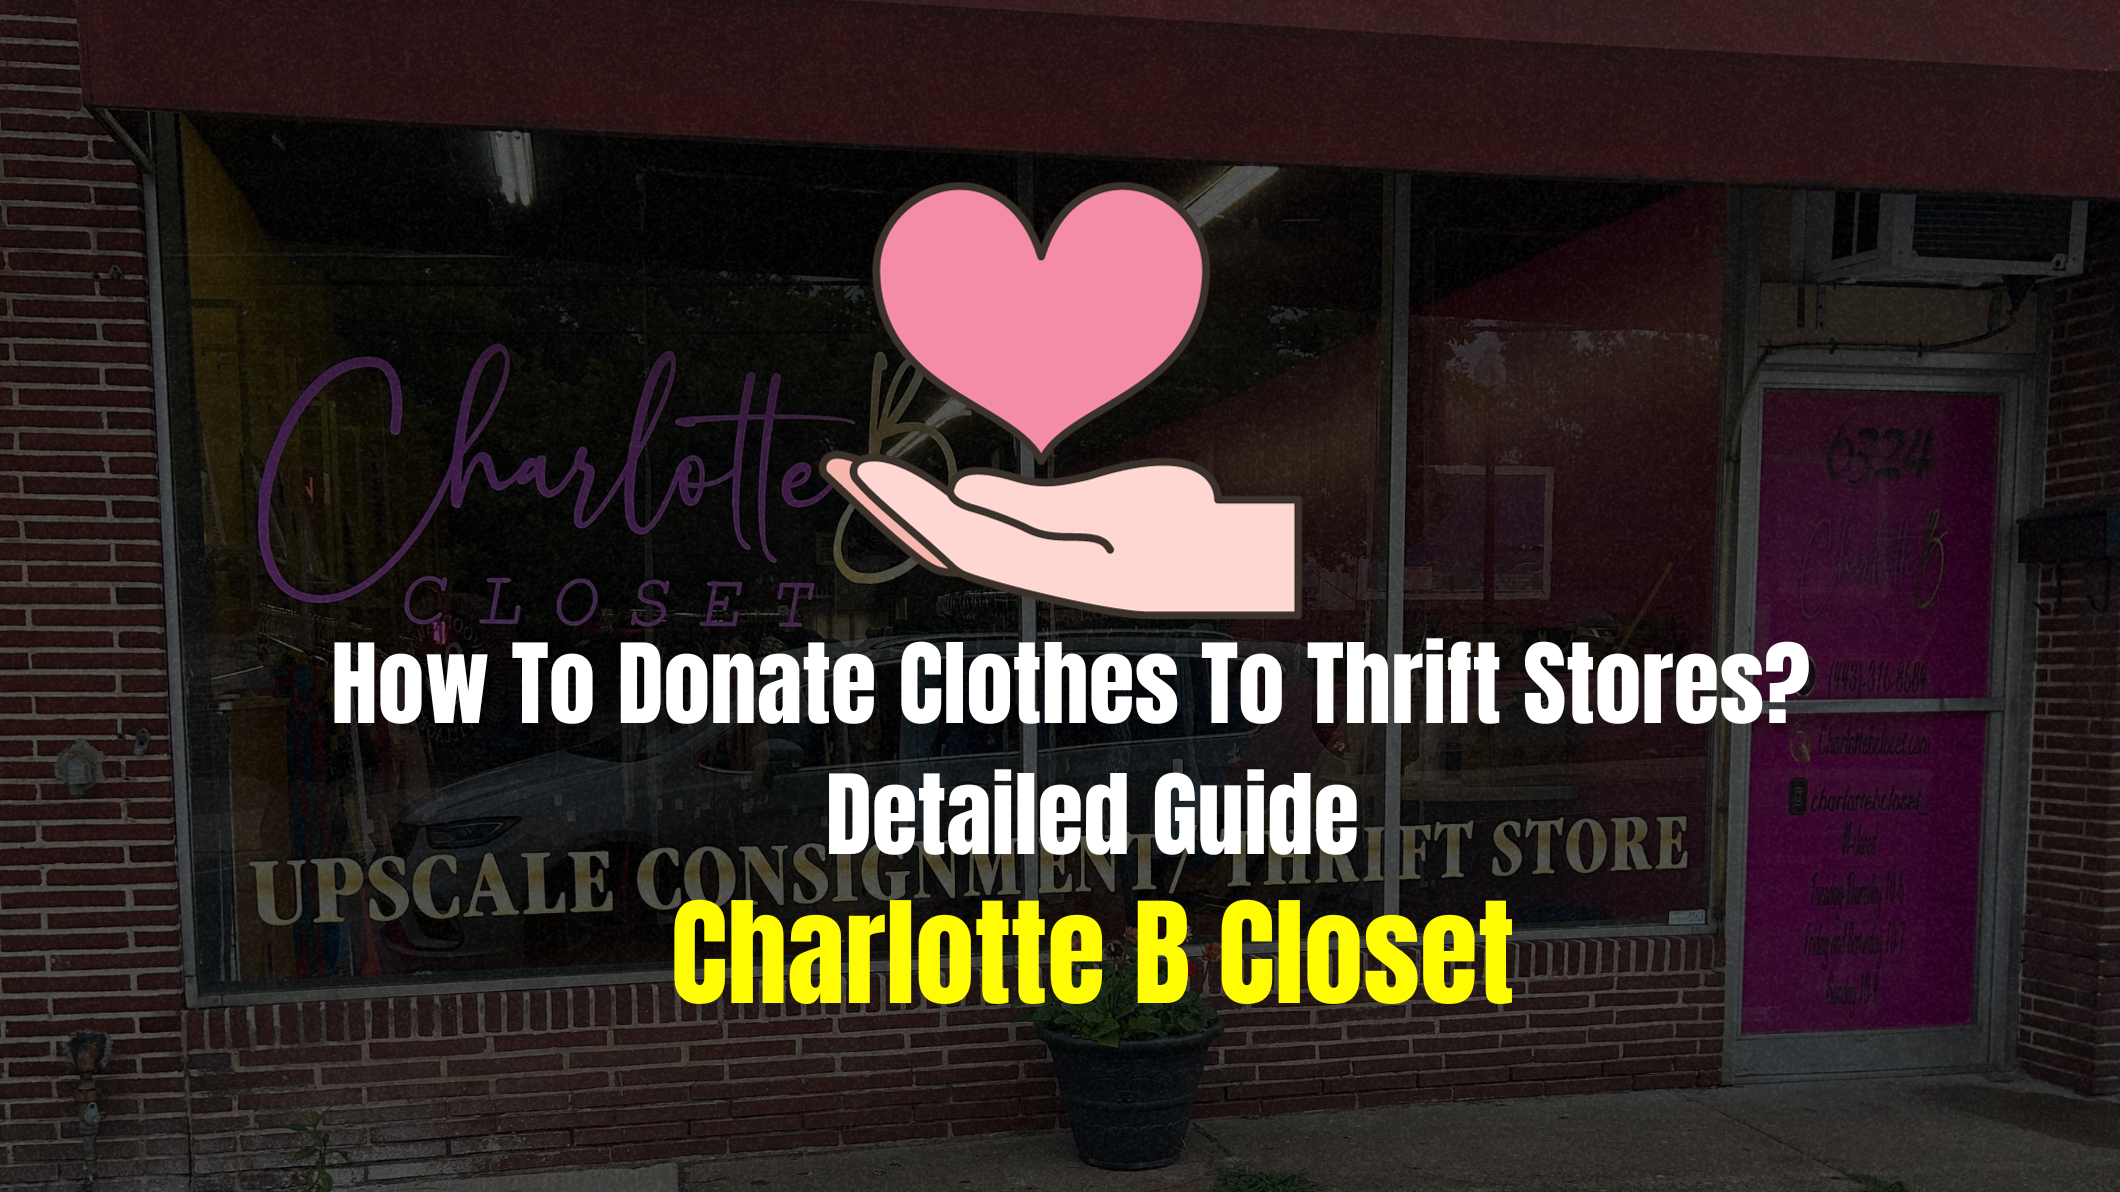 How To Donate Clothes To Thrift Stores